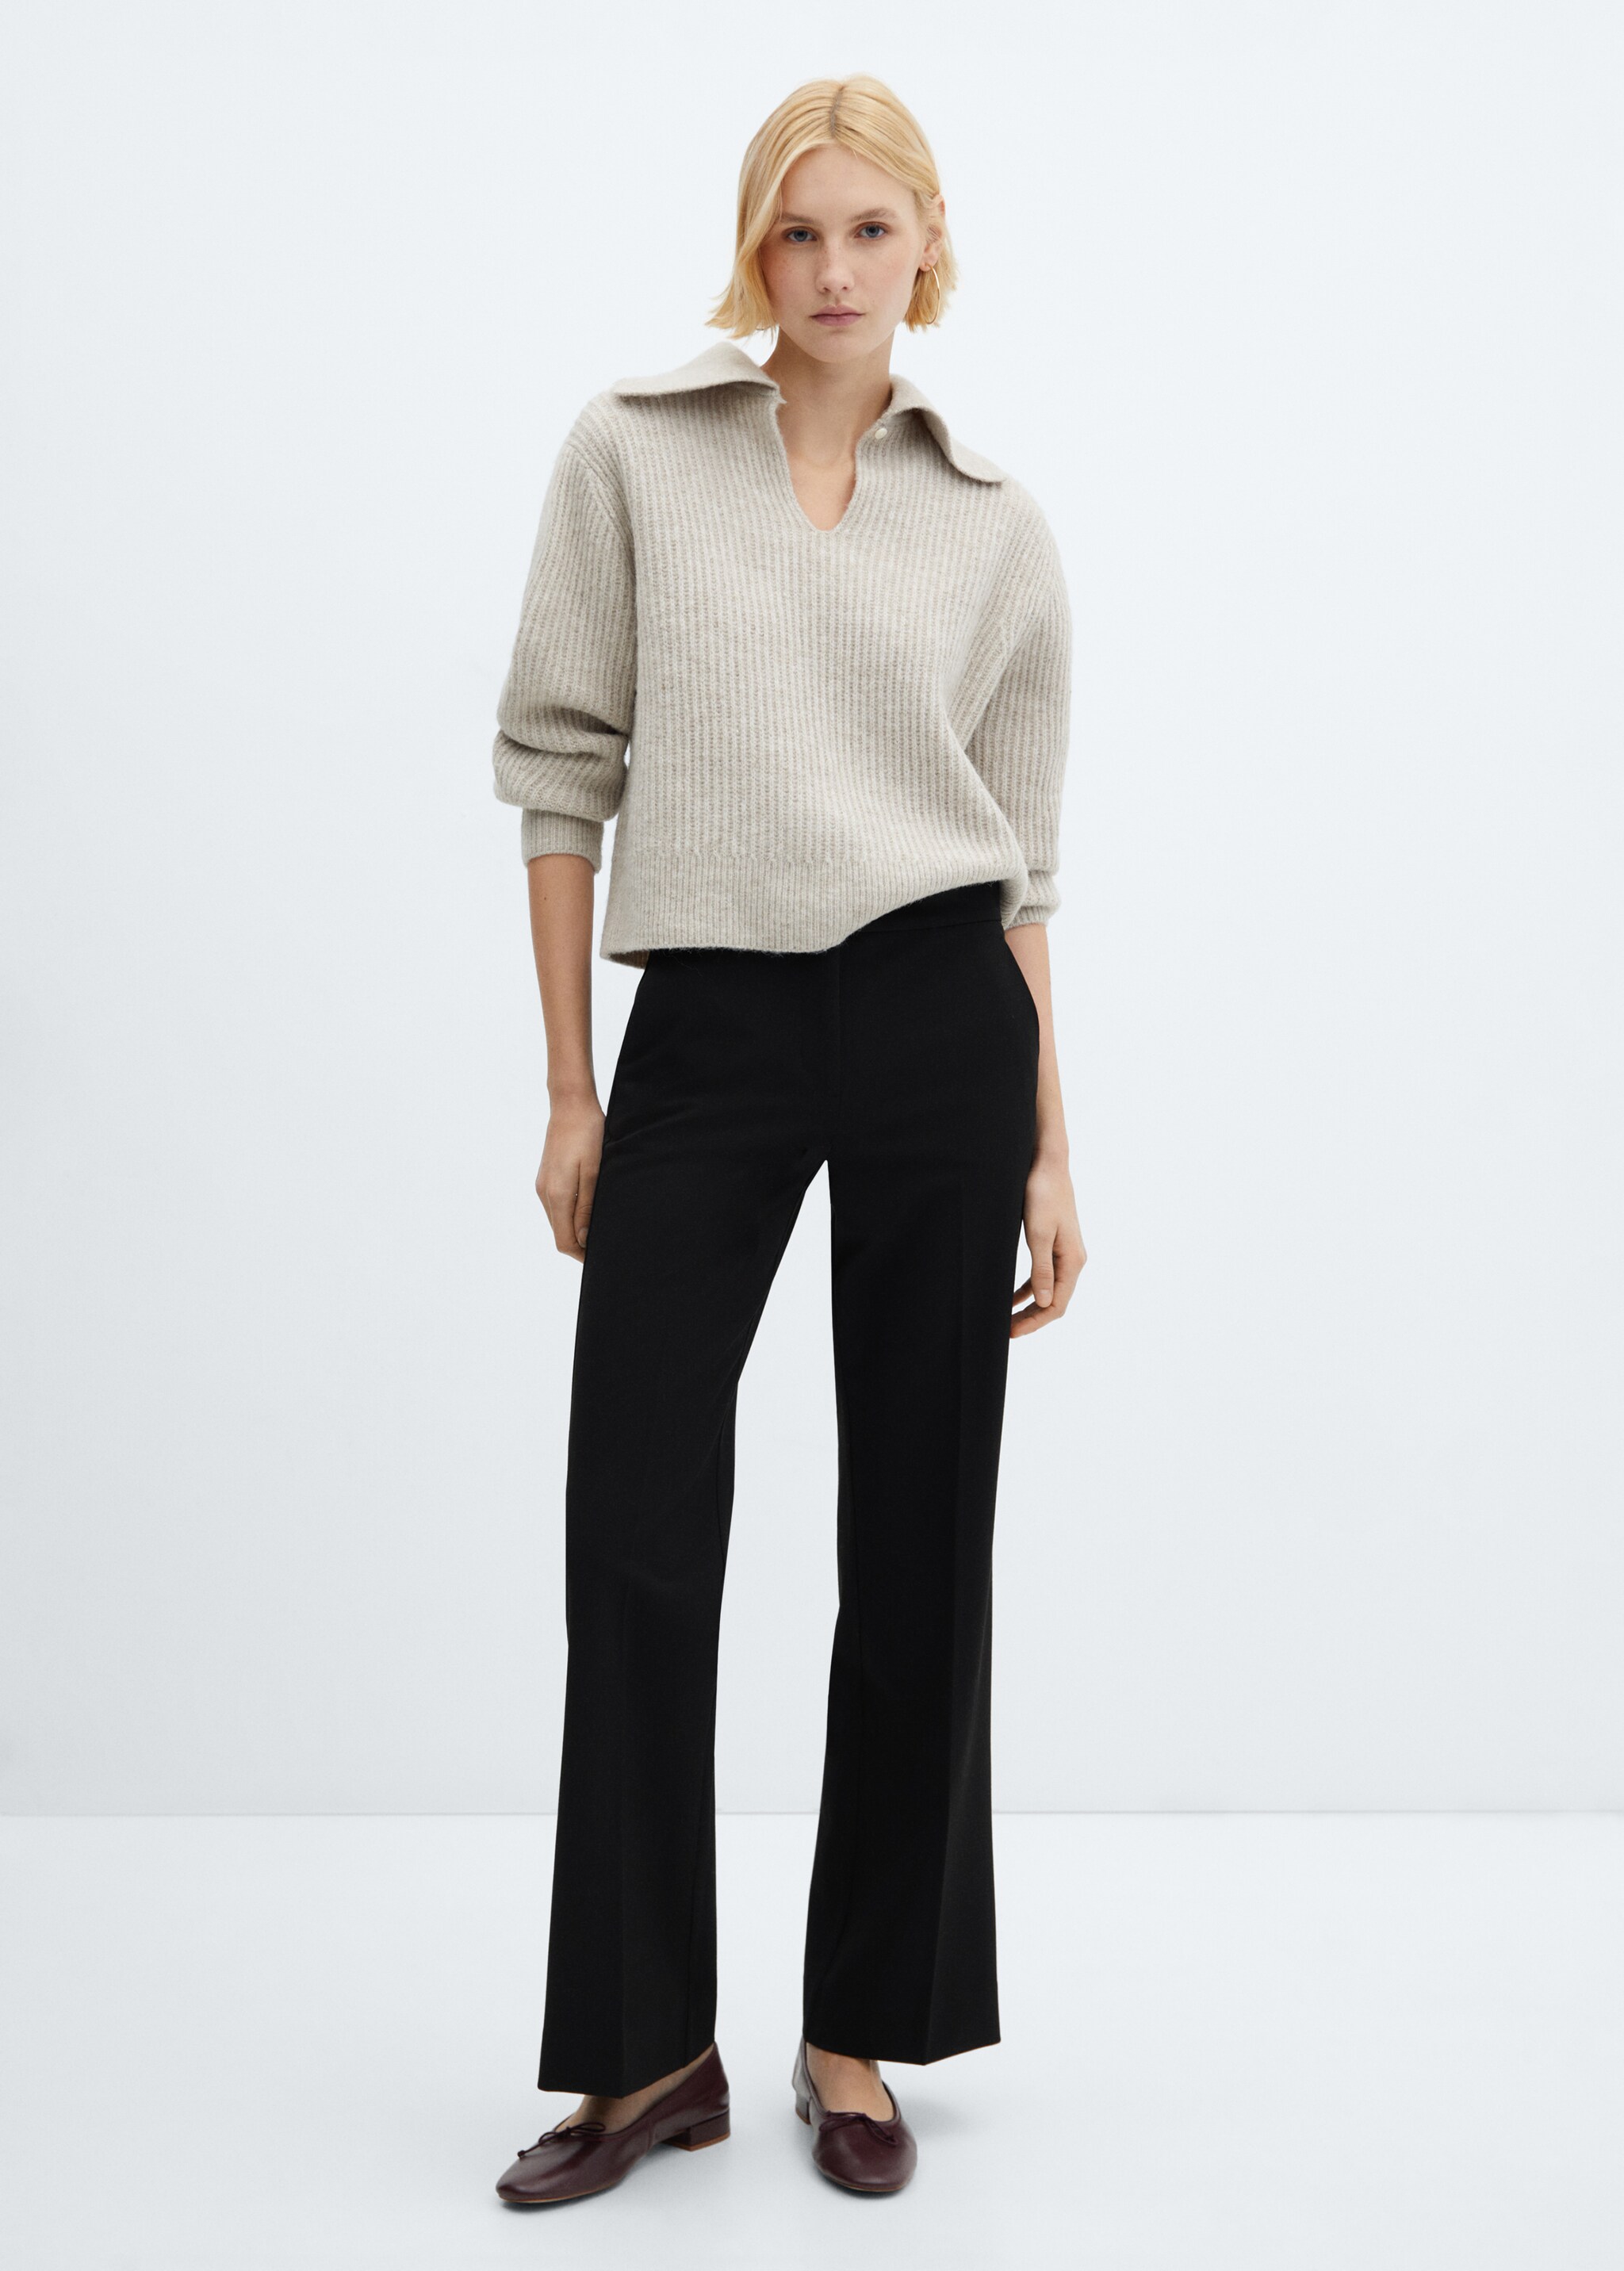 Mid-rise wideleg trousers - General plane